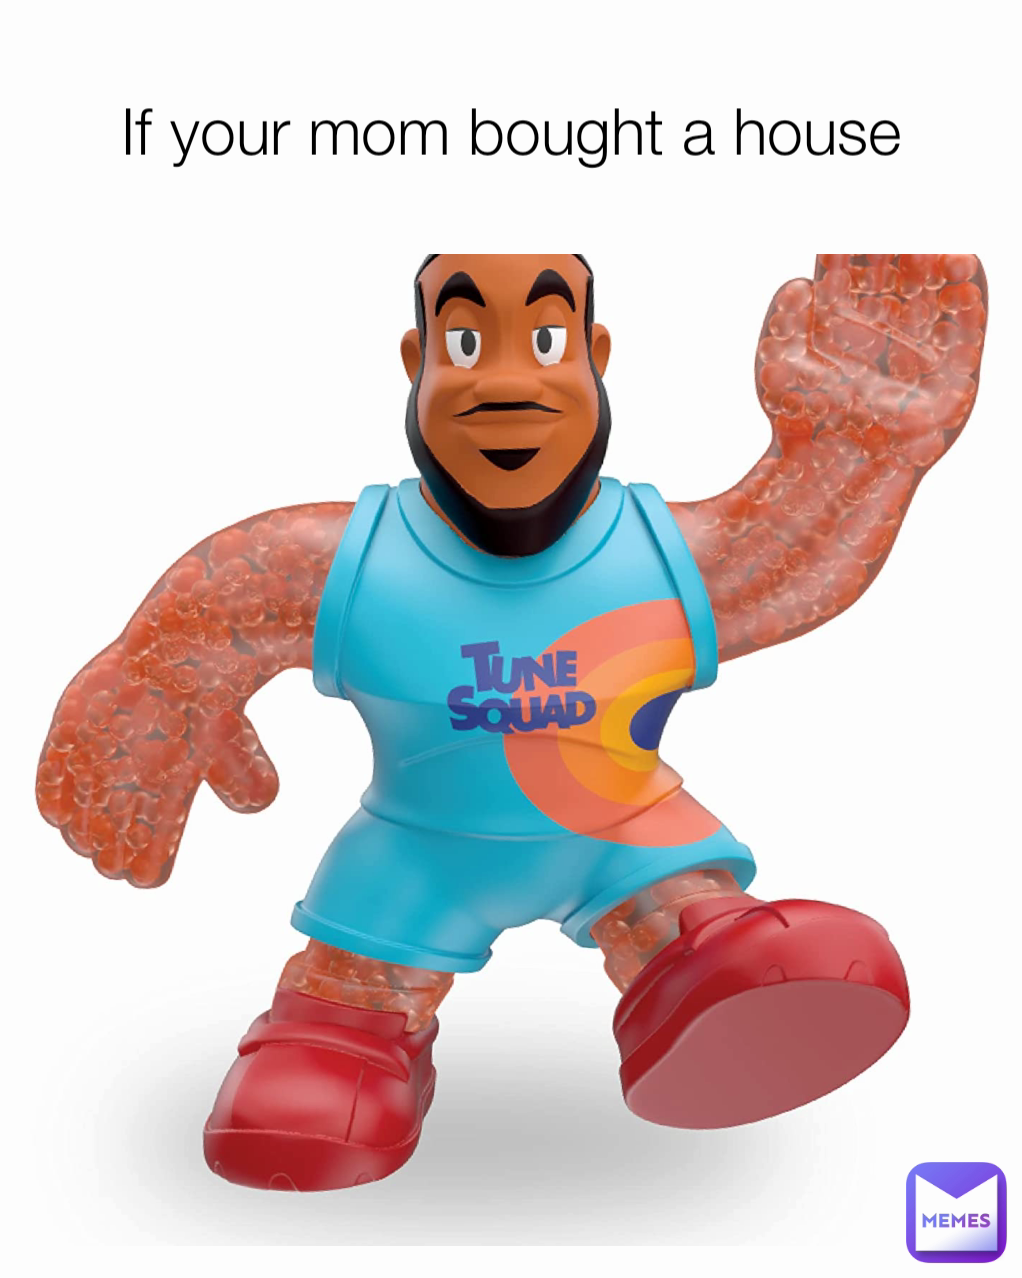 If your mom bought a house